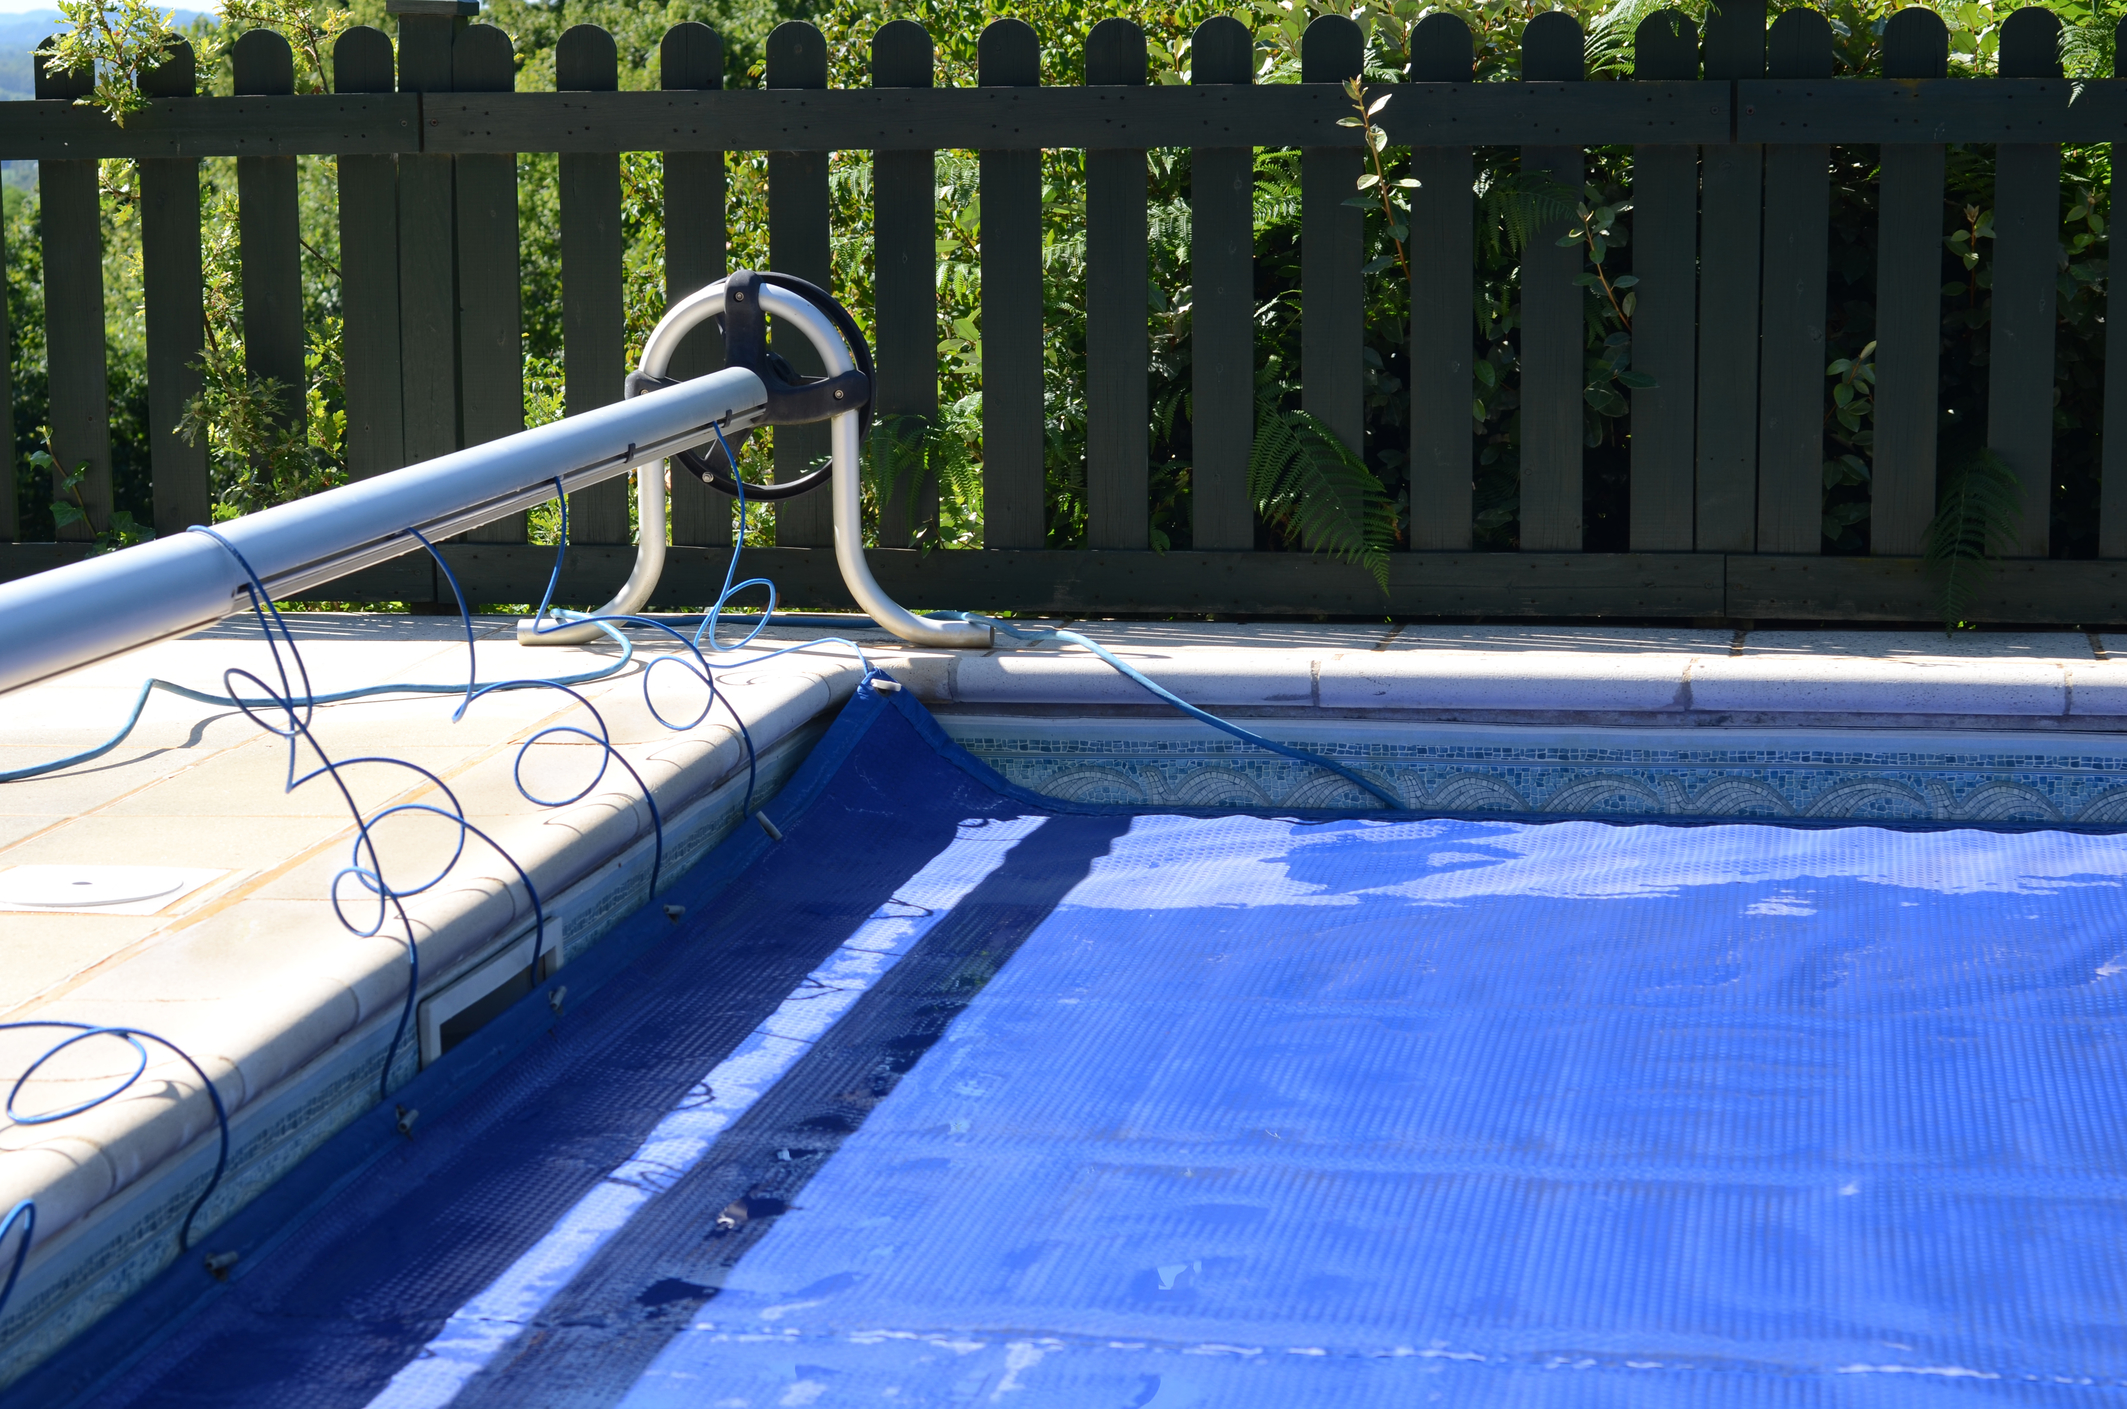 Steps for Preparing Your Pool for the Summer - House Tipster